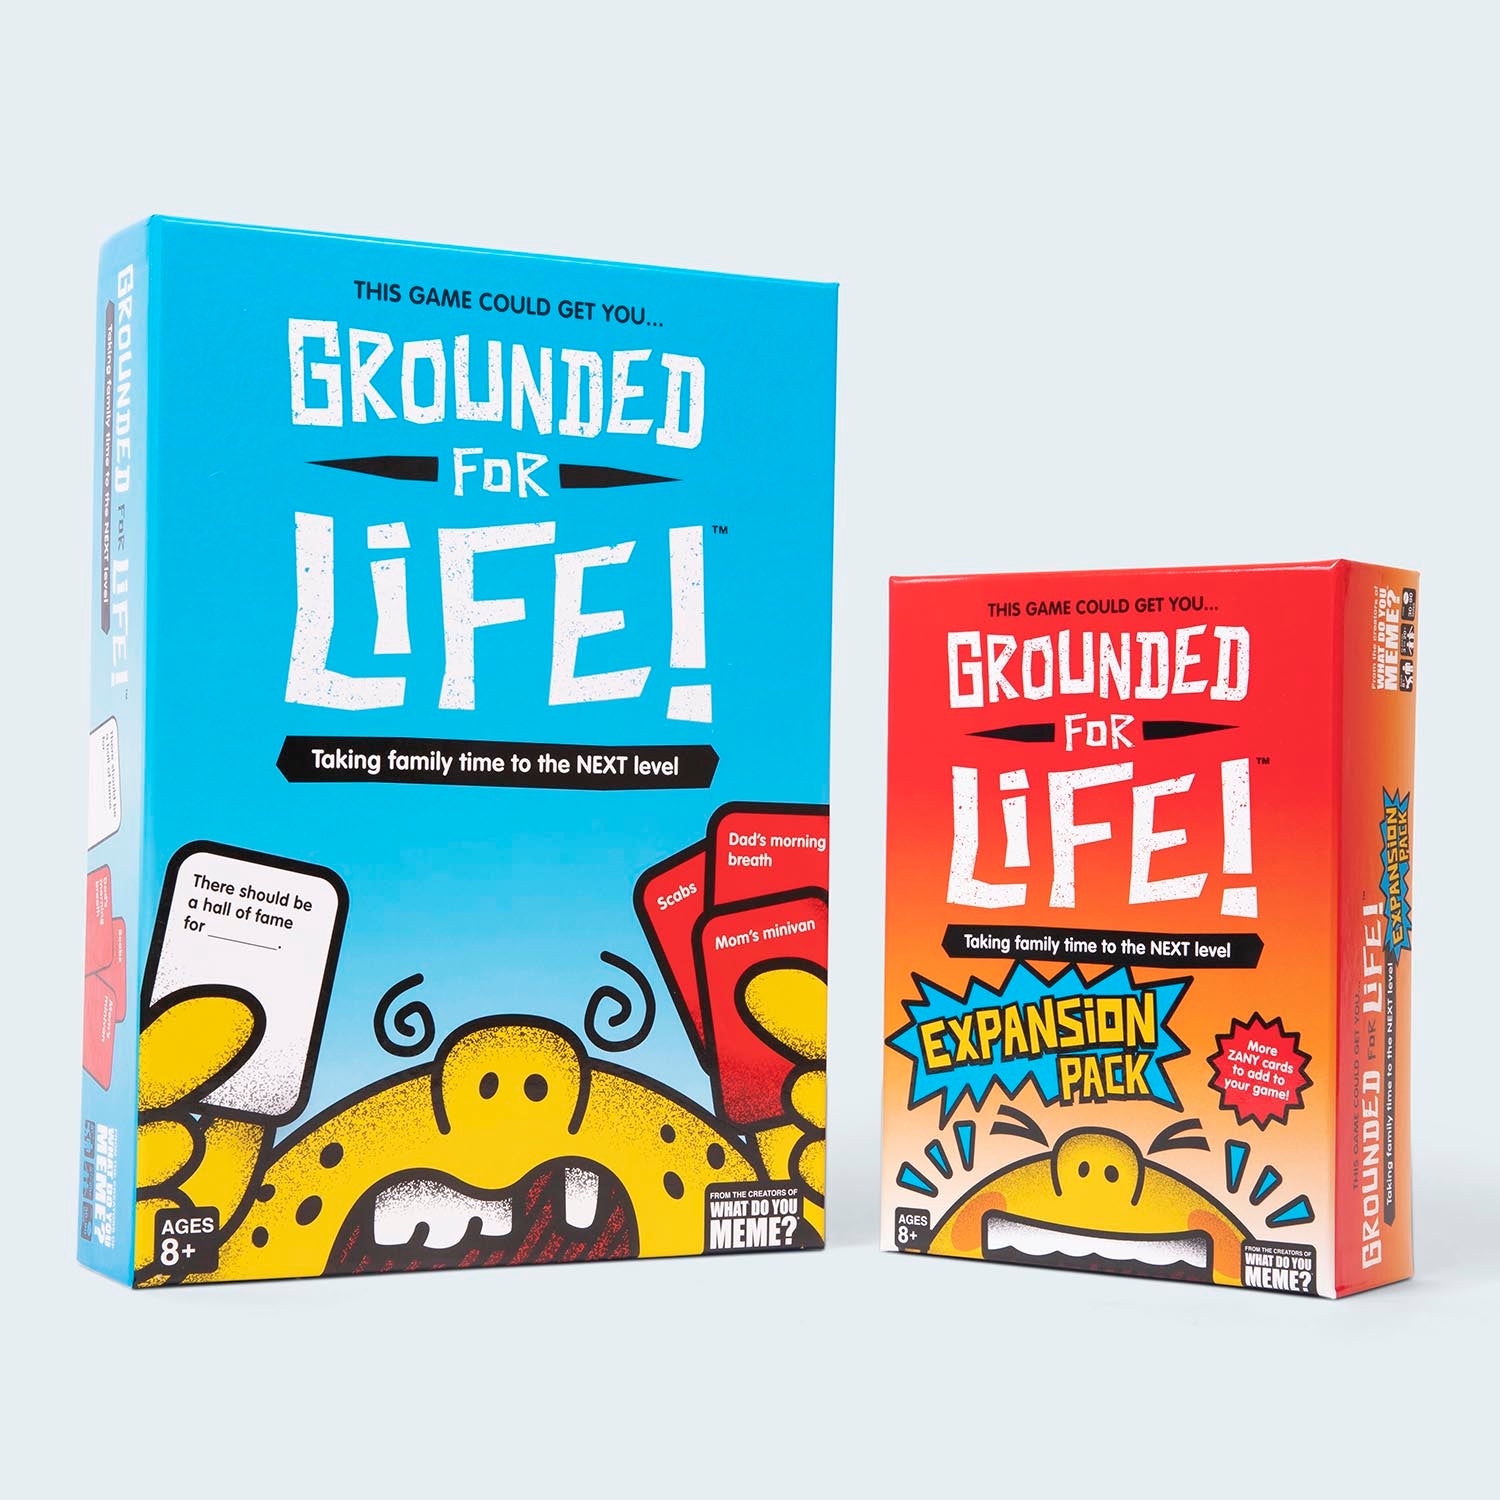 grounded-for-life-expansion-pack-game-box-and-game-play-05-what-do-you-meme-by-relatable